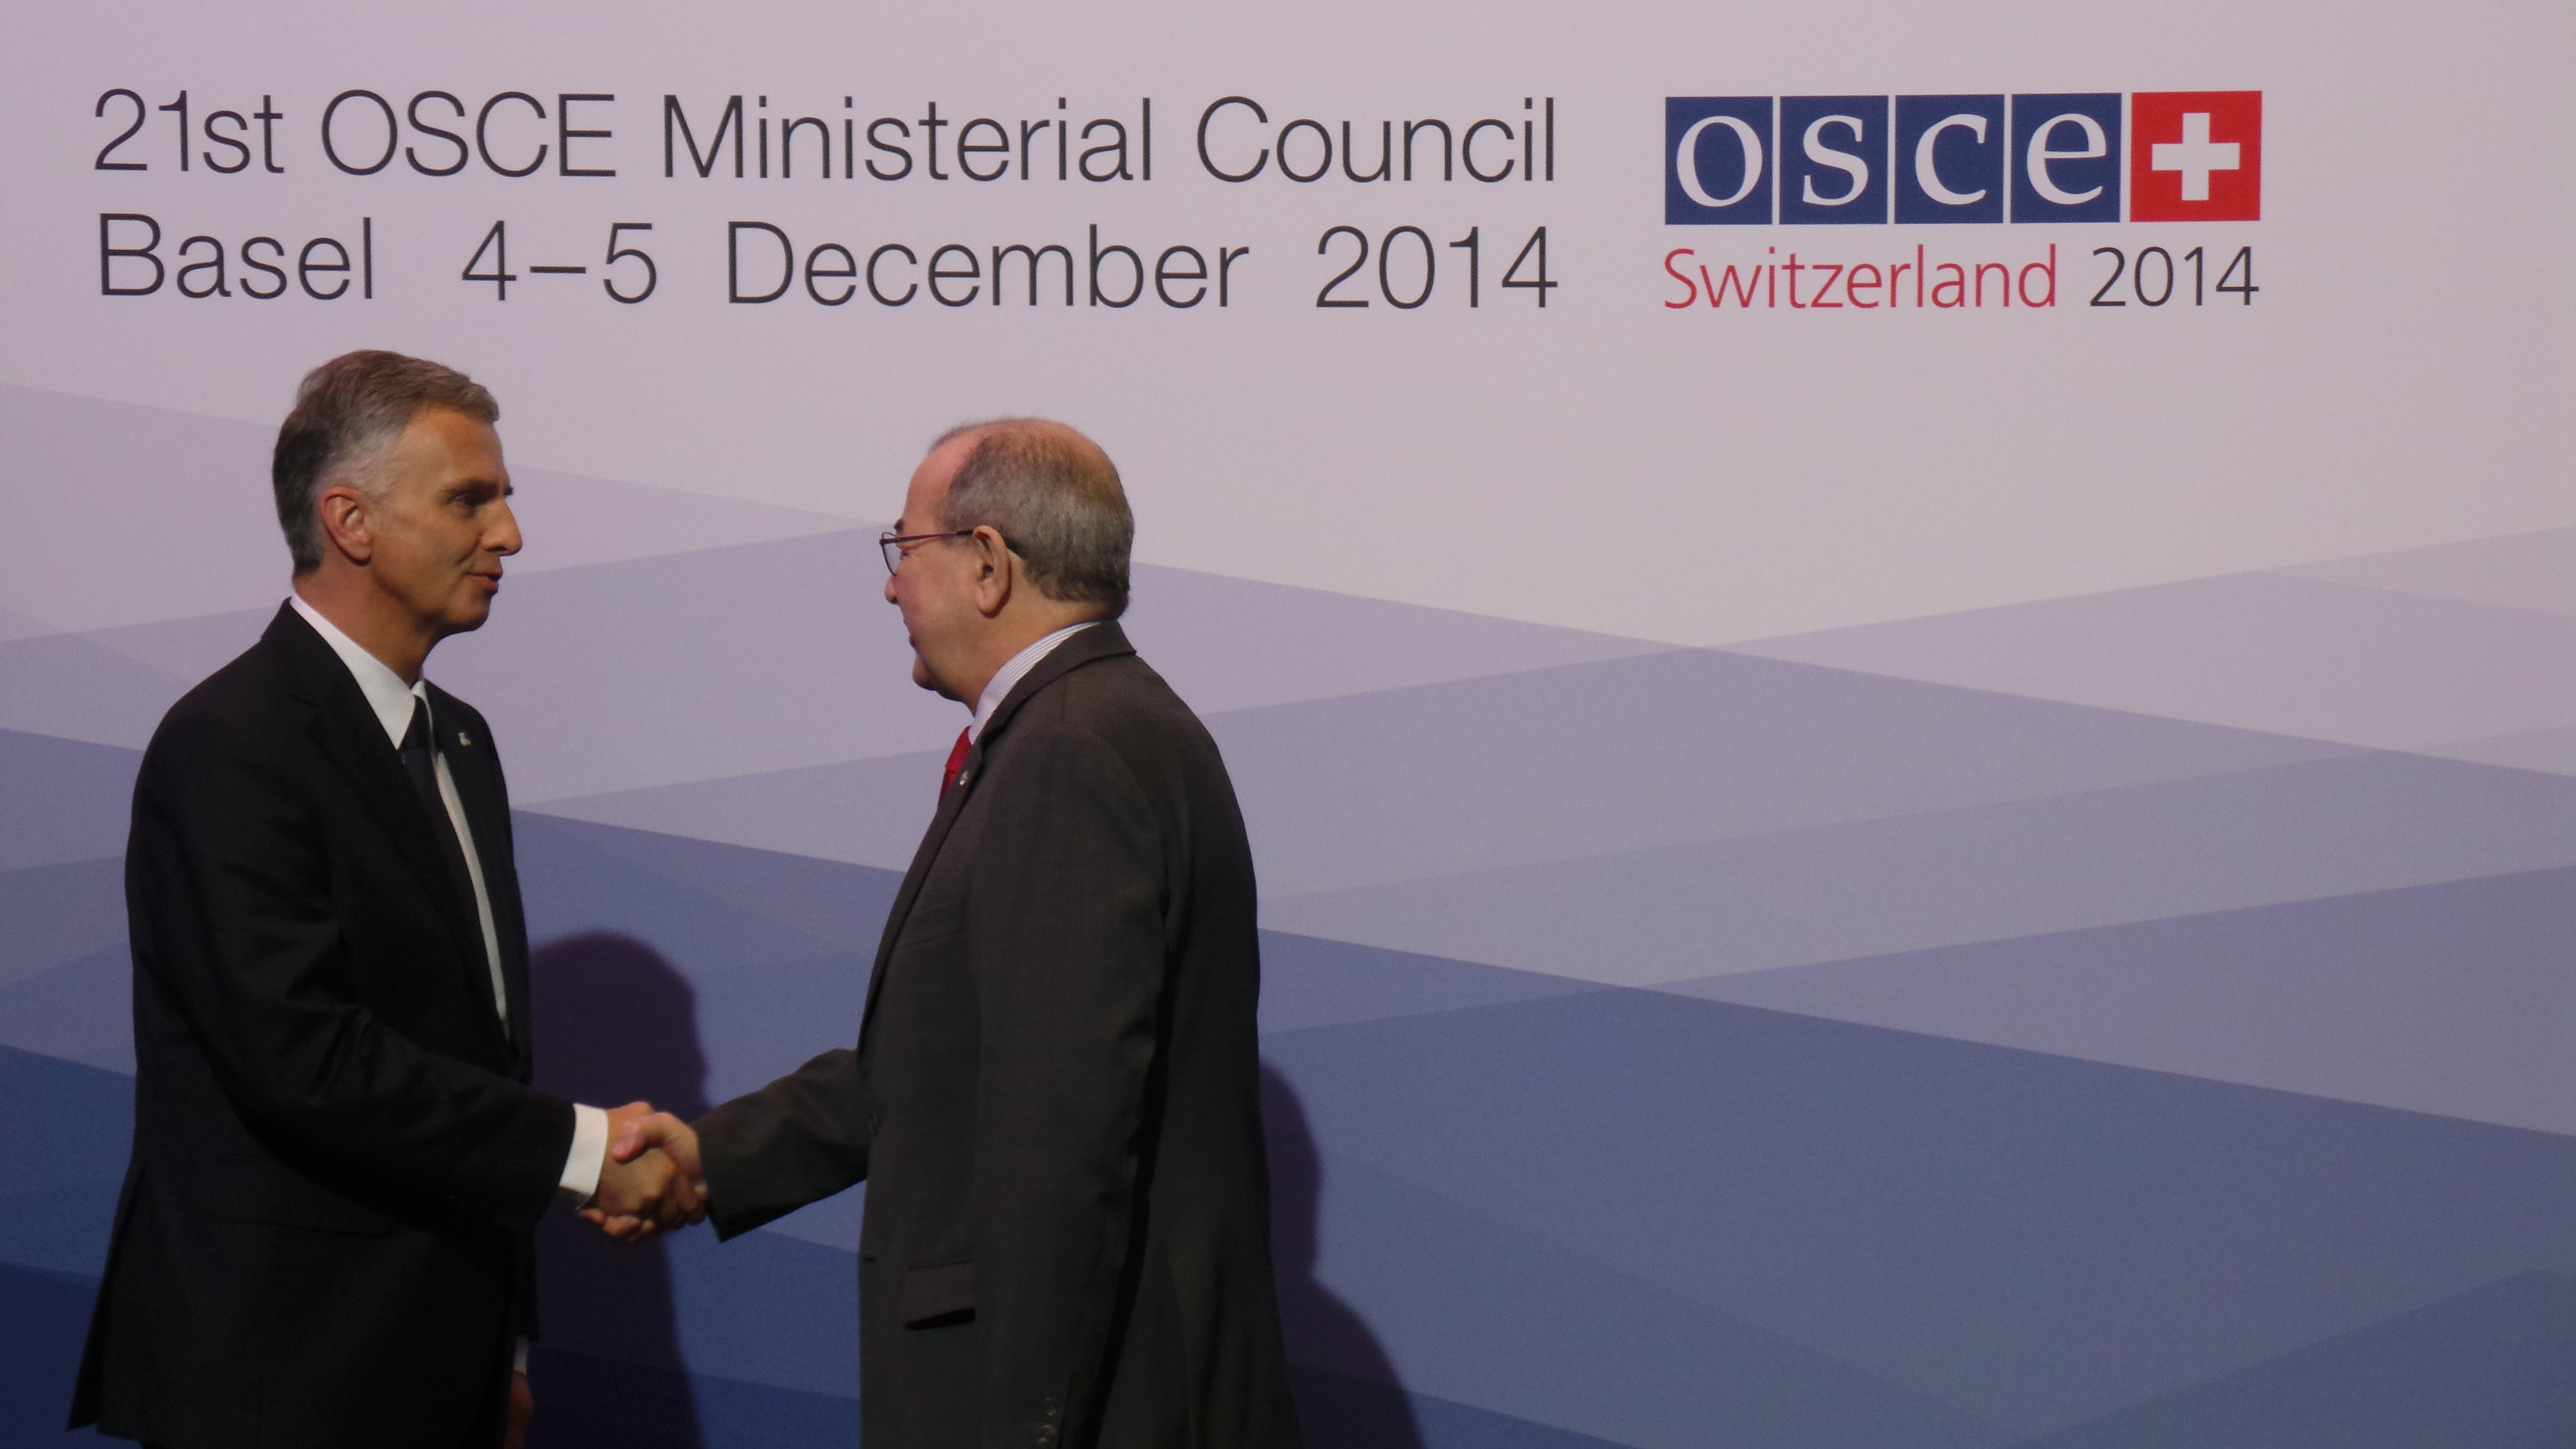 The President of the Swiss Confederation, Didier Burkhalter, greets Mohamed Benhocine, Permanent Representative to the United Nations offices at Vienna at the OSCE Ministerial Council 2014 in Basel